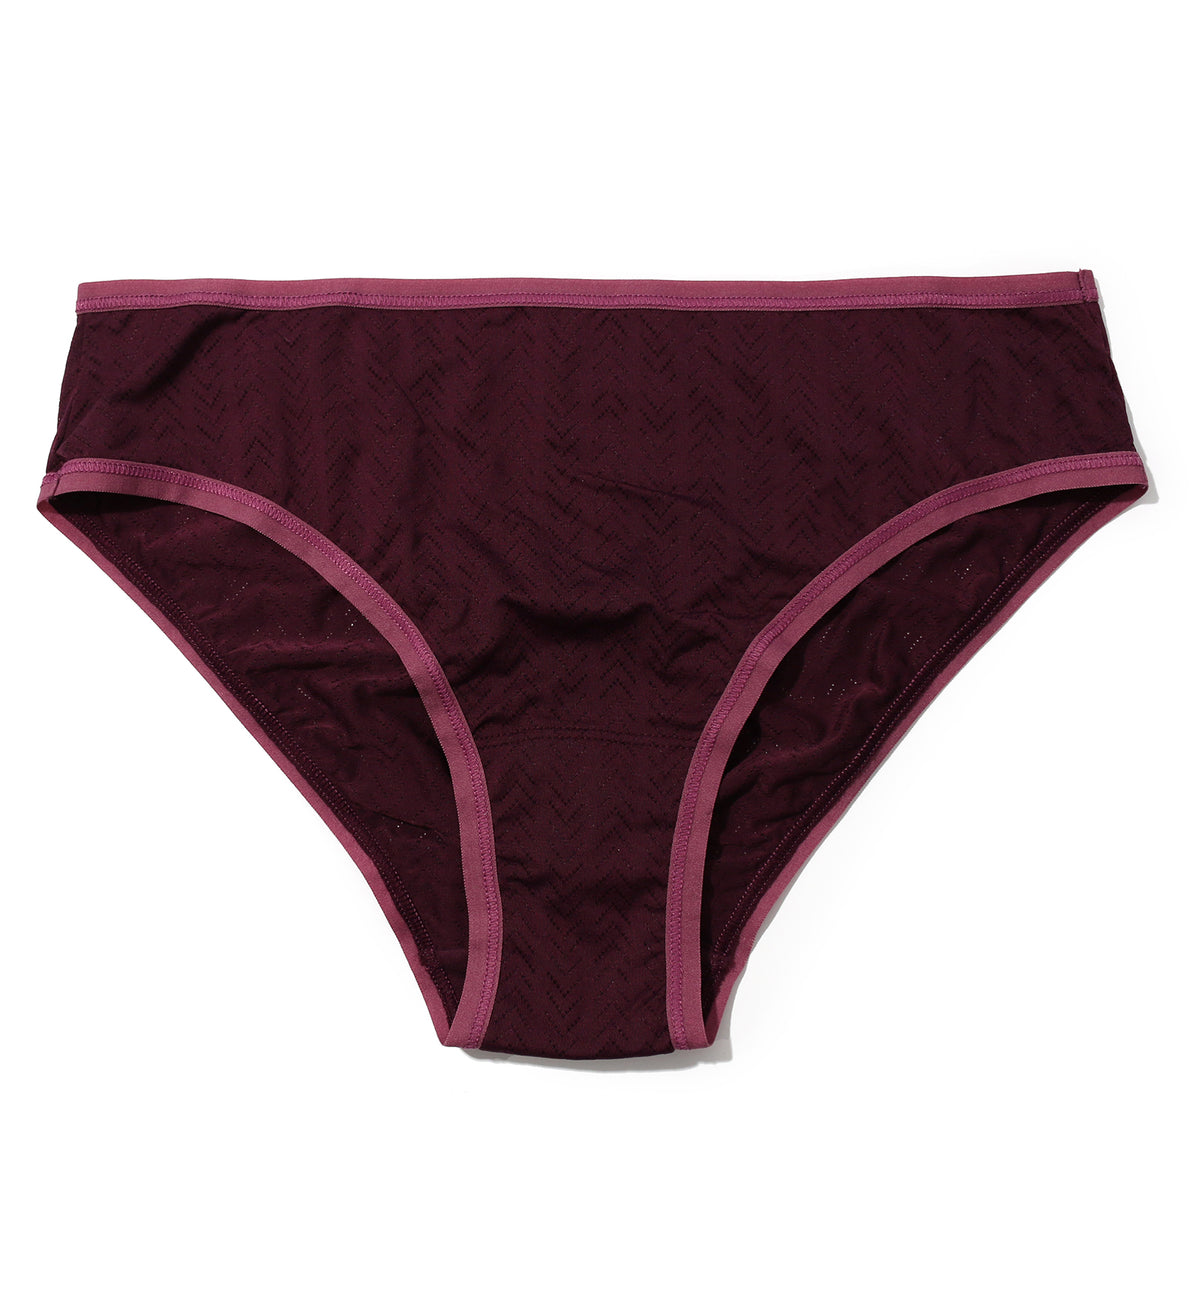 Hanky Panky MoveCalm Ruched Back Brief (2P2184),XS,Dried Cherry/Damson Plum - Dried Cherry/Damson Plum,XS